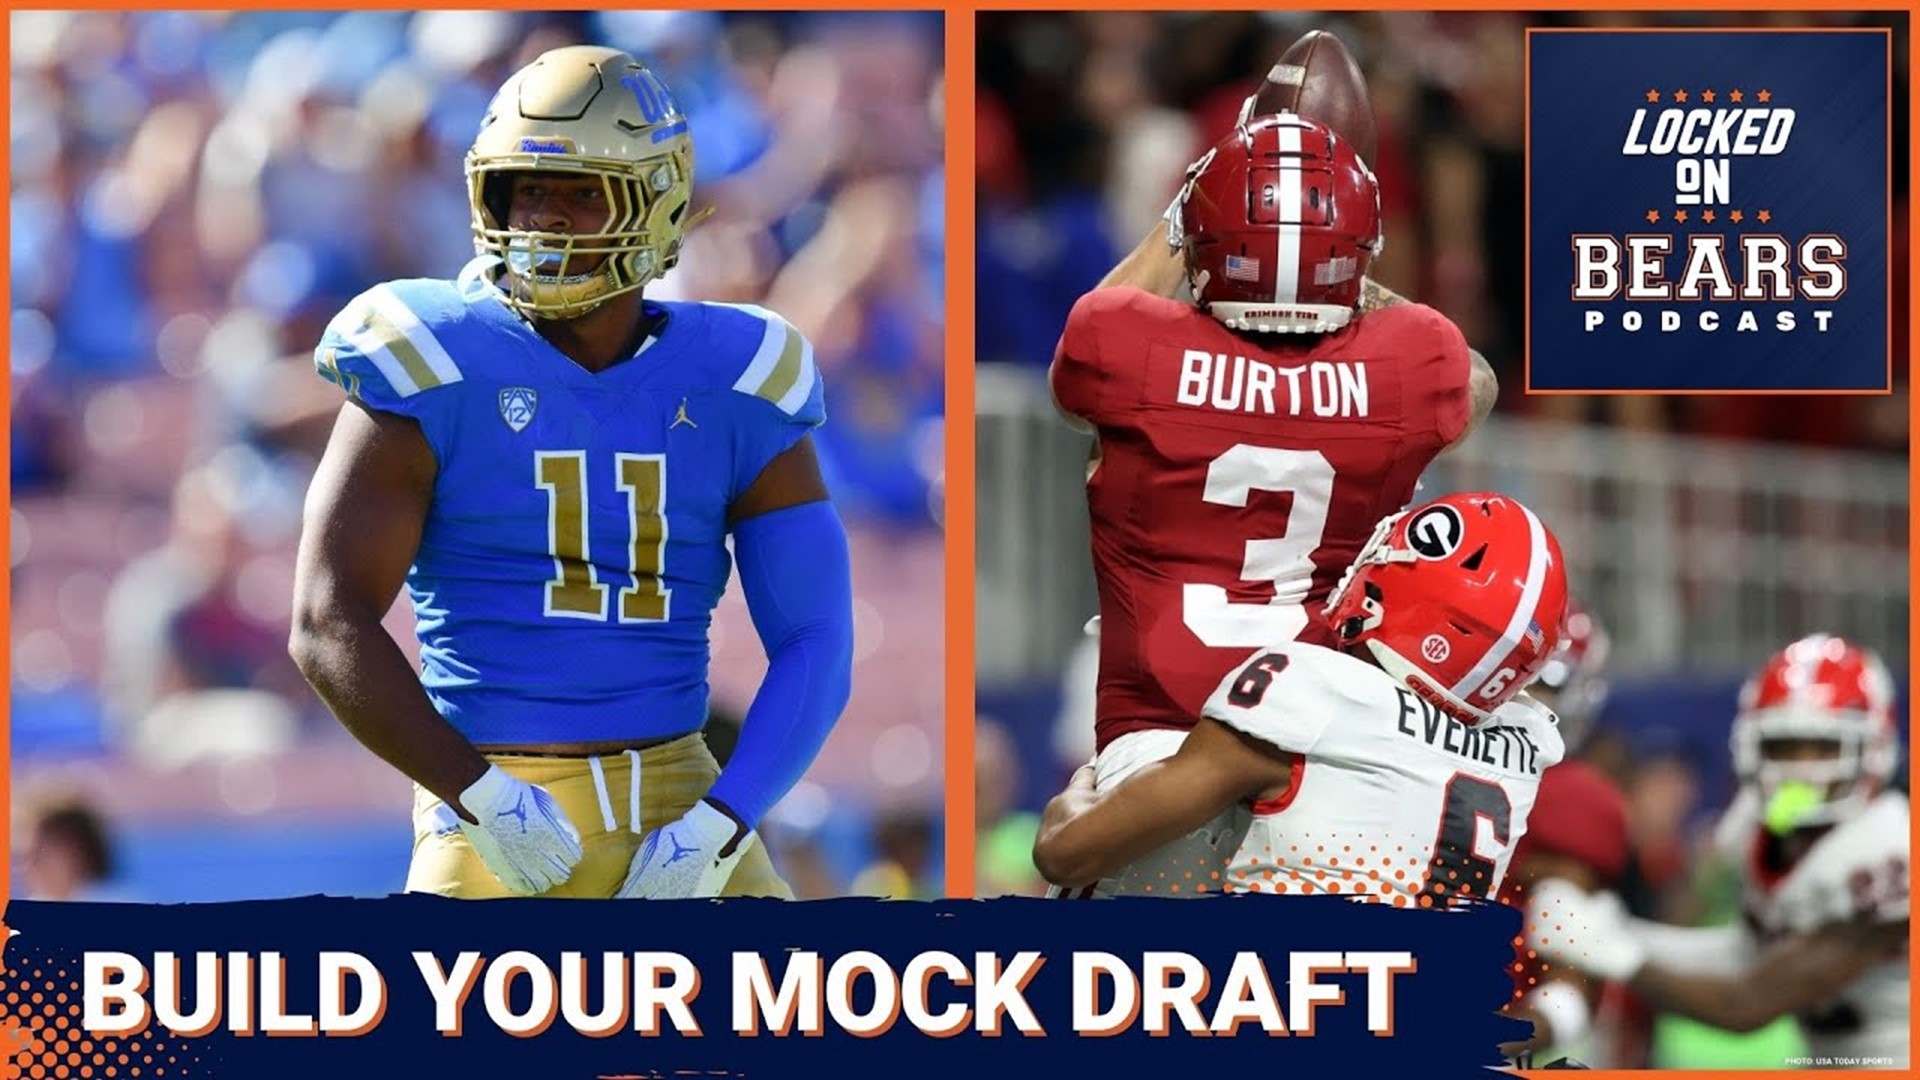 The Chicago Bears only have a few realistic options for the 9th overall pick, which makes it easier to compare different mock draft scenarios side-by-side.